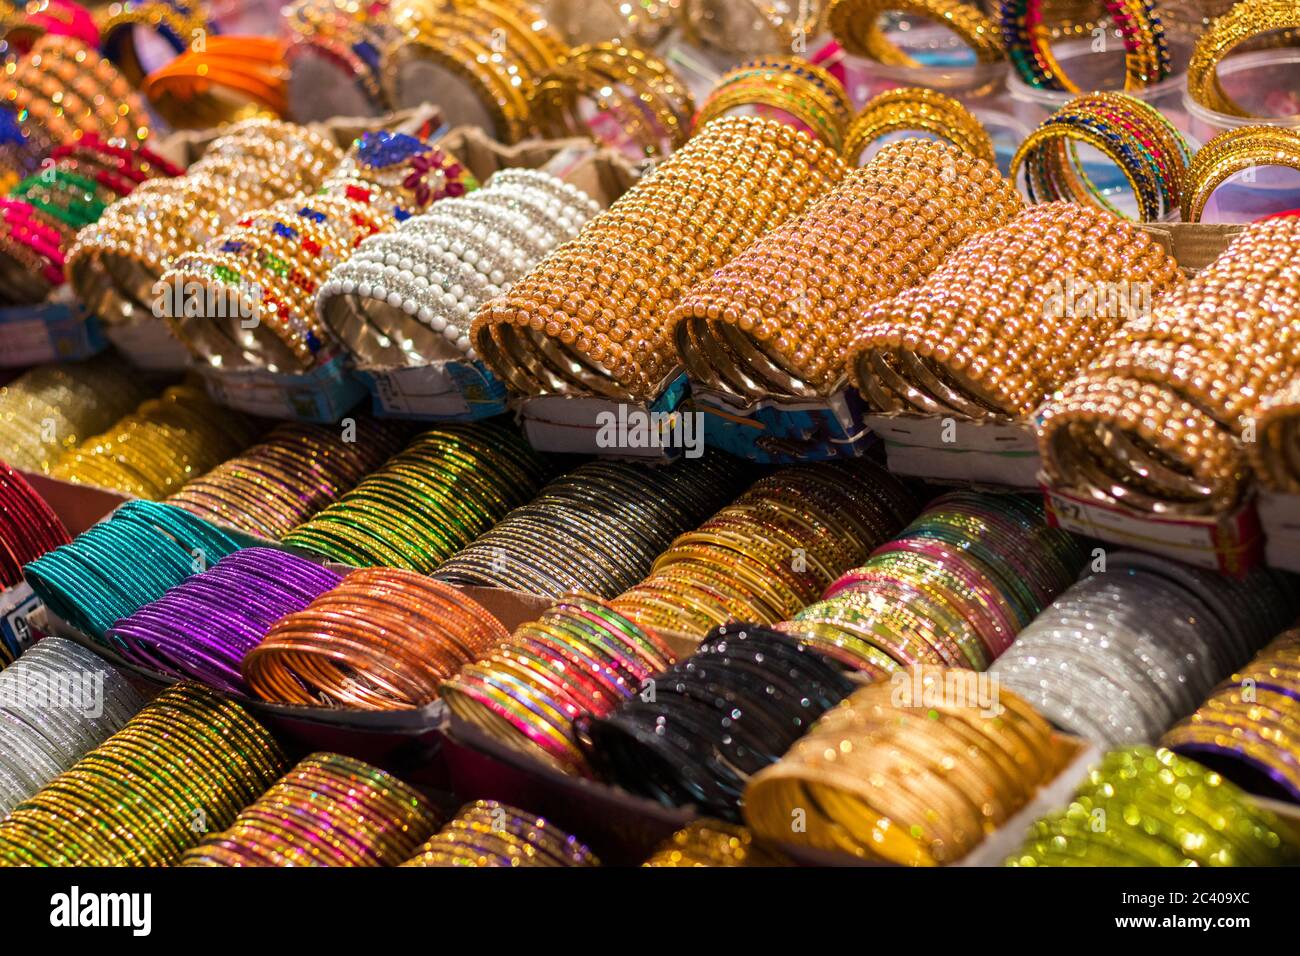 Multi-Colored Indian Glass/Metal Bangles Arranged On The Shelf For Sale Stock Photo